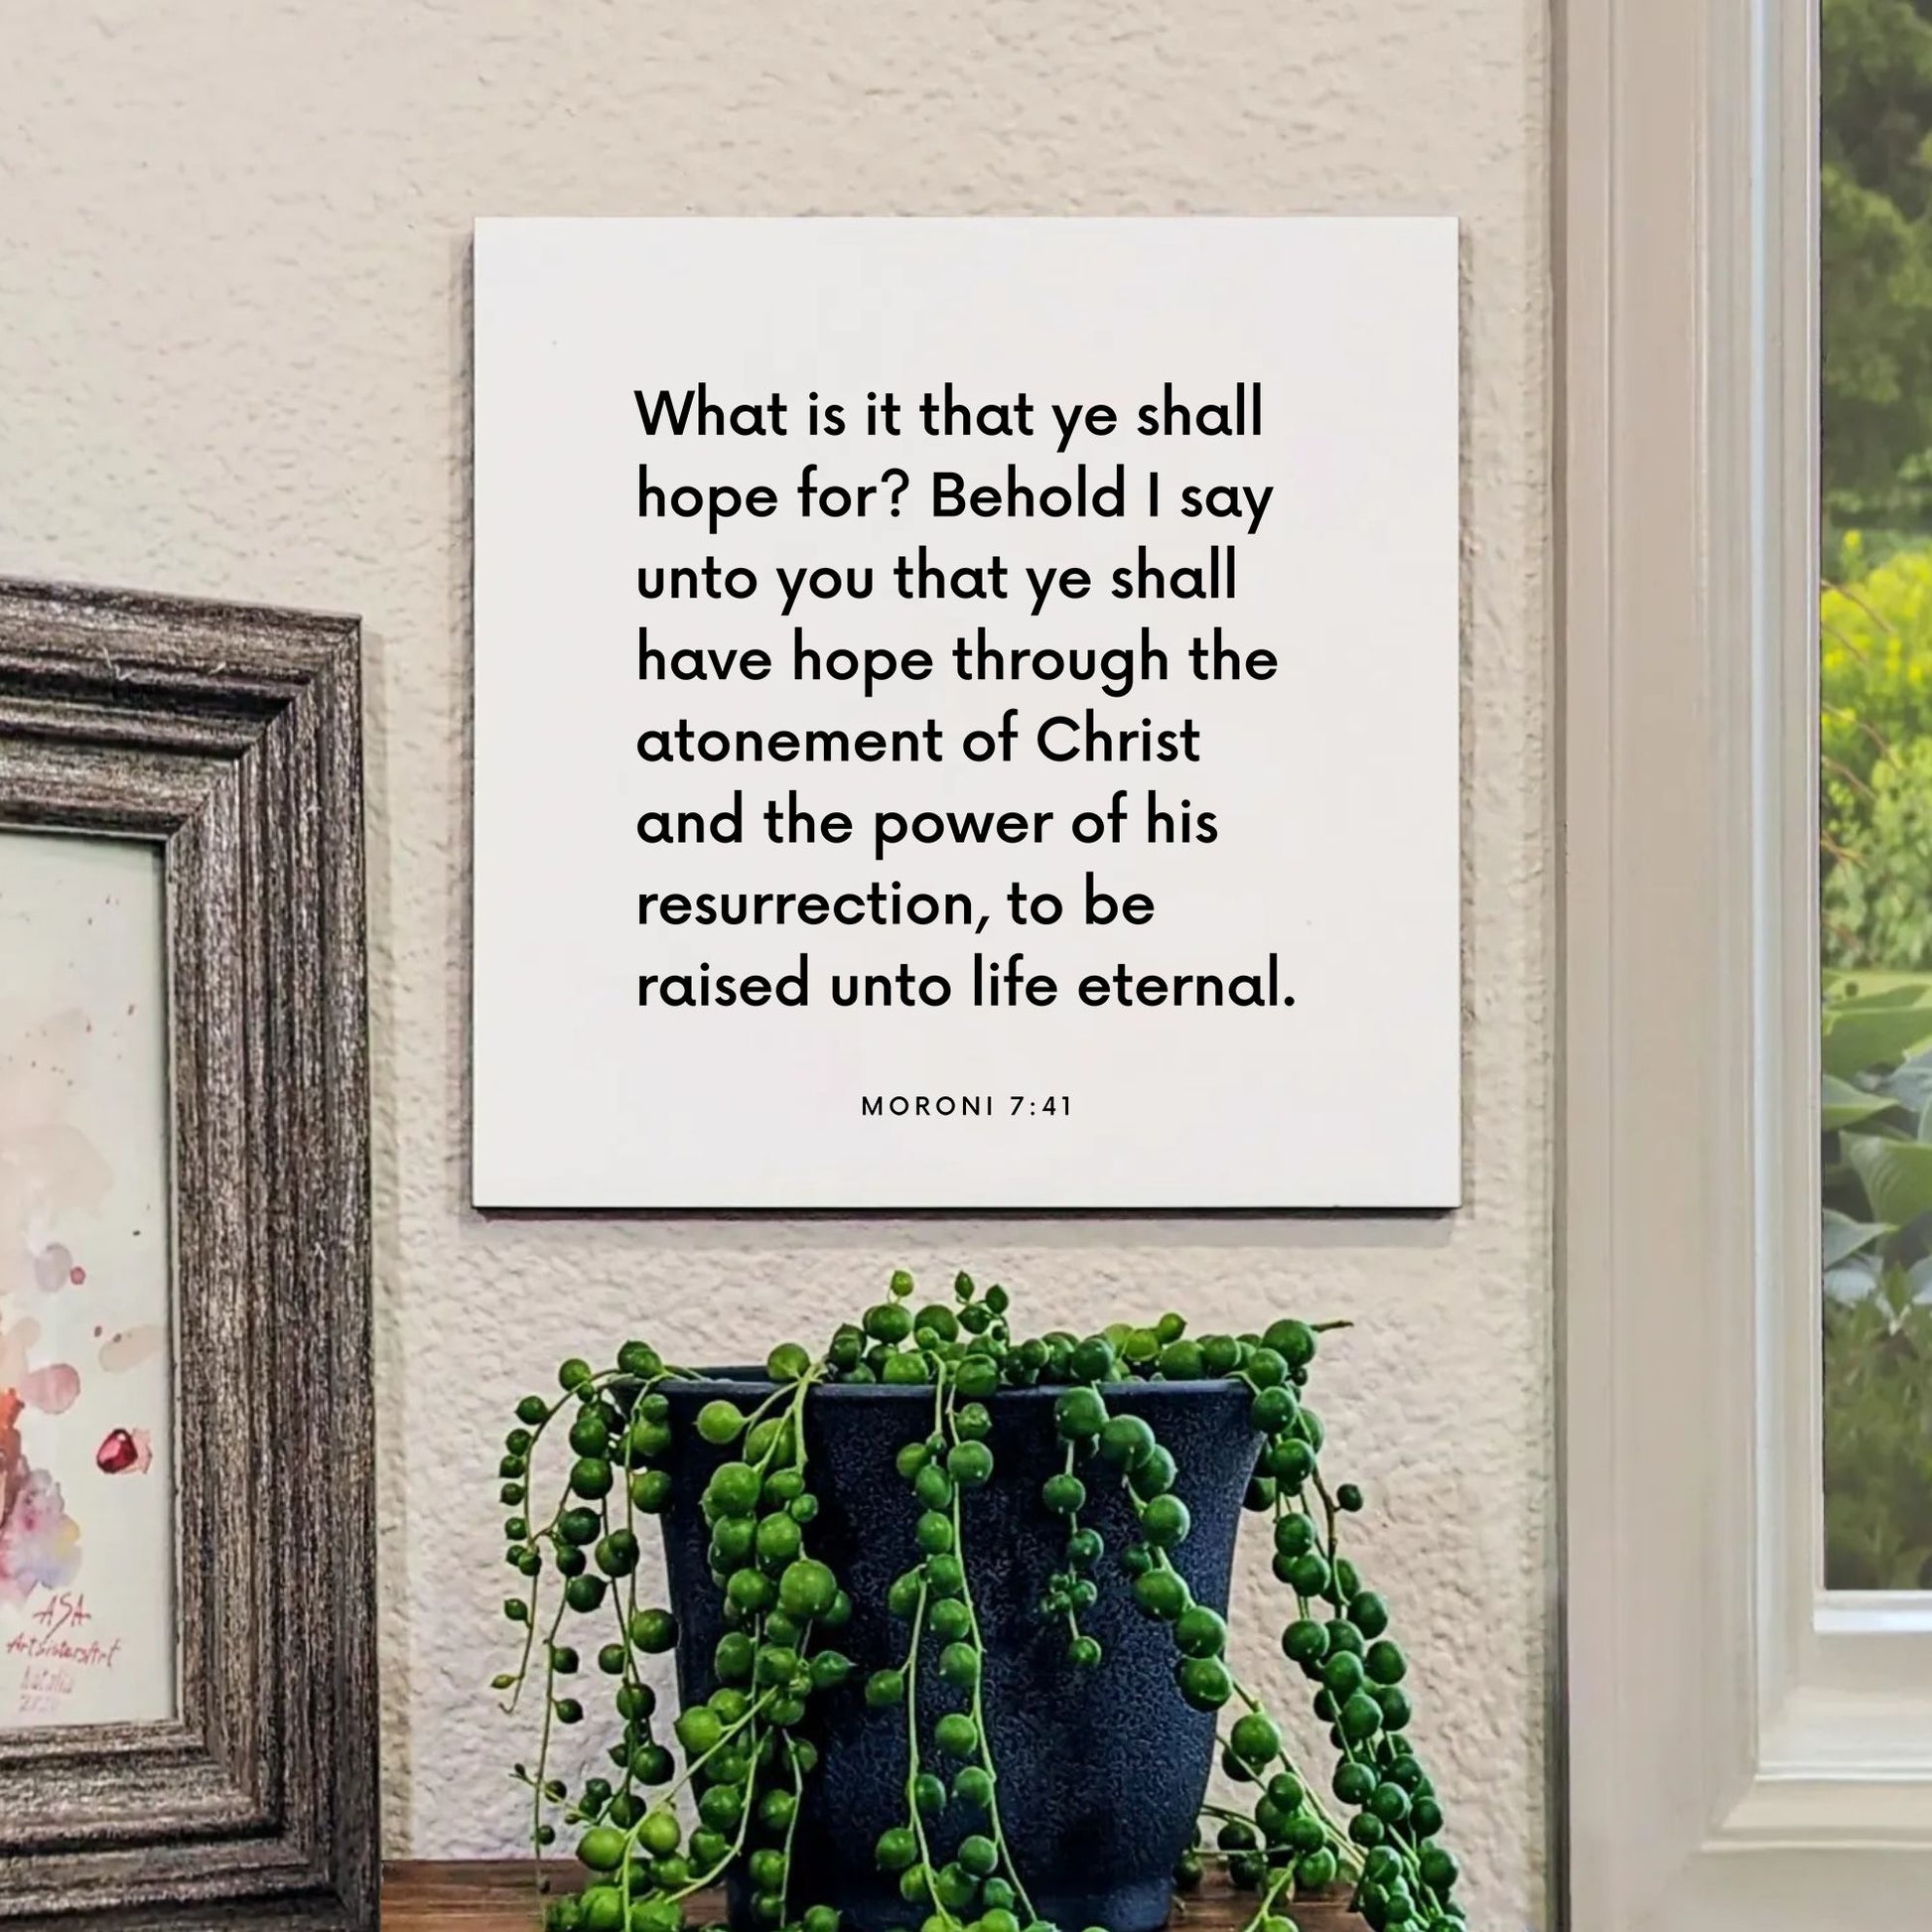 Window mouting of the scripture tile for Moroni 7:41 - "Ye shall have hope through the atonement of Christ"